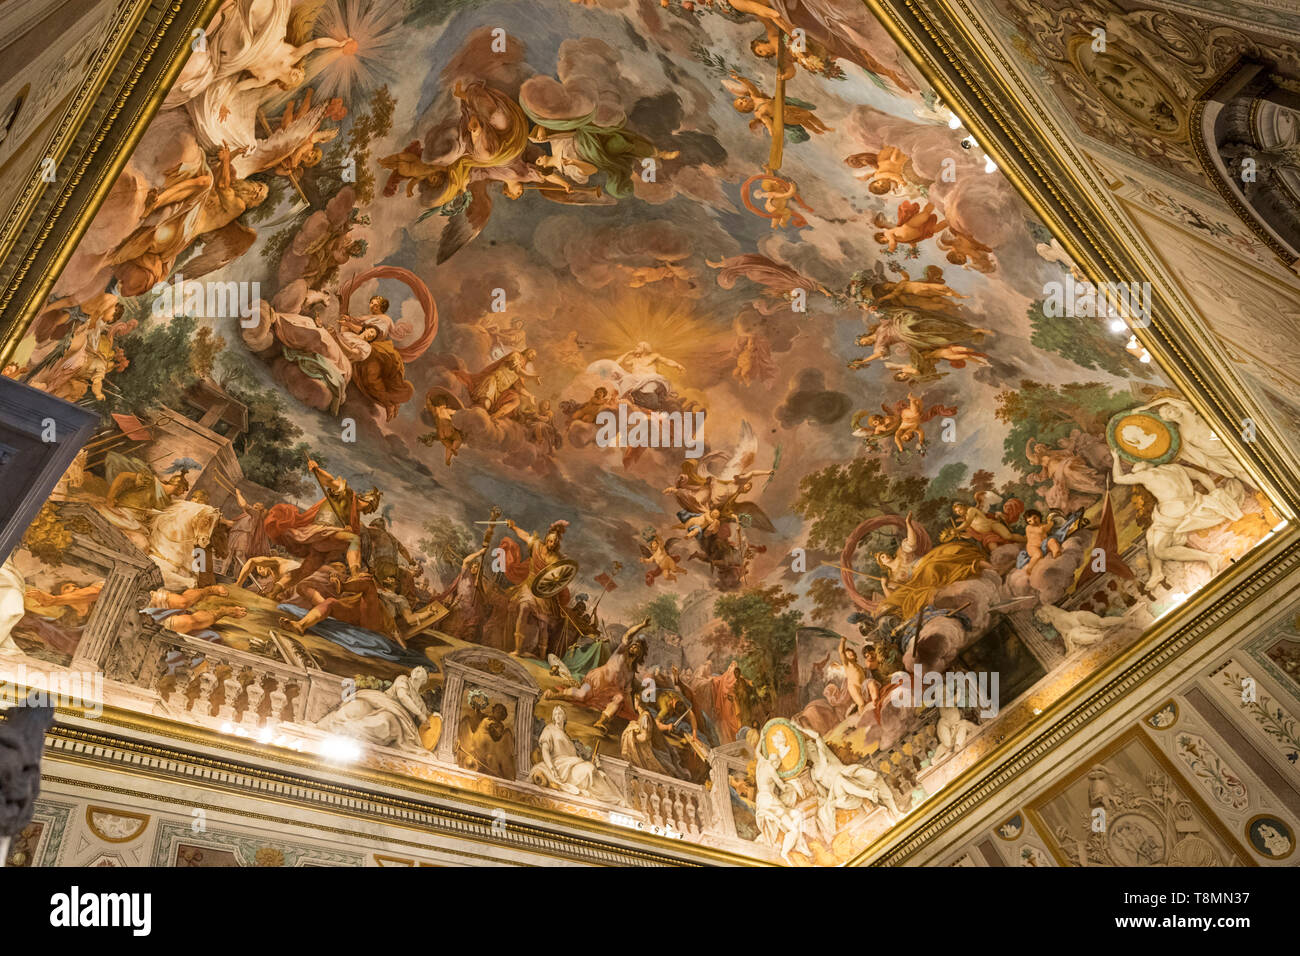 Italy, Rome: Borghese Gallery, an art gallery located in Villa Borghese - Editorial use only Stock Photo